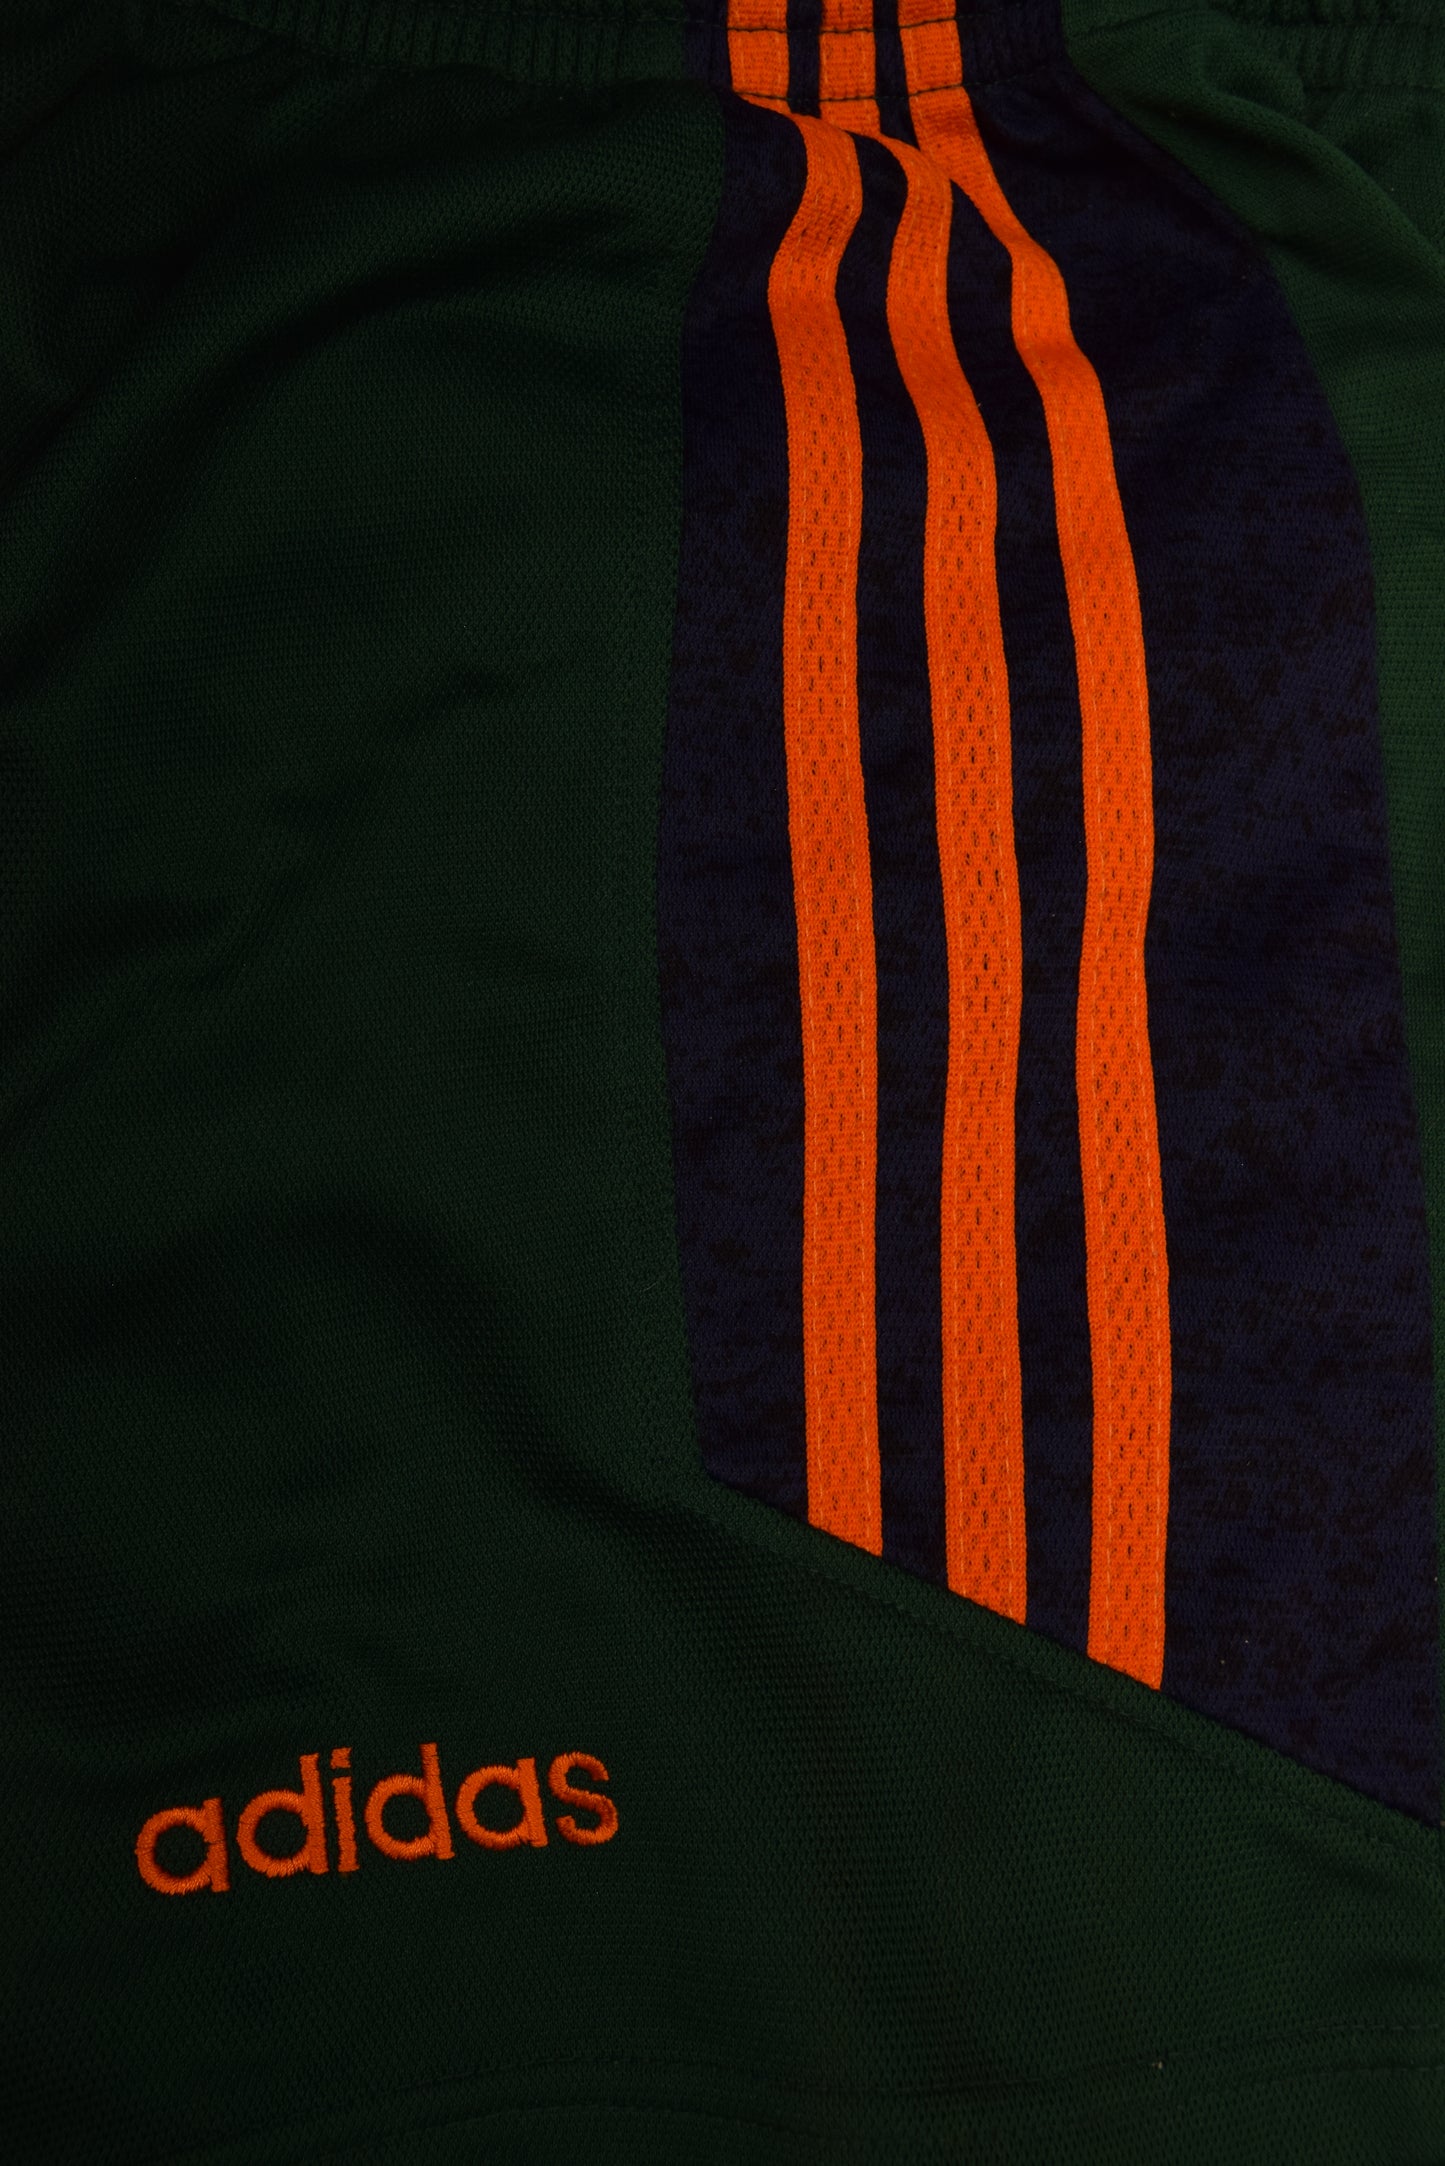 Vintage Newcastle United Adidas 1997 - 1998 Away Football Shorts Brown Blue Green Orange Made in UK Size M